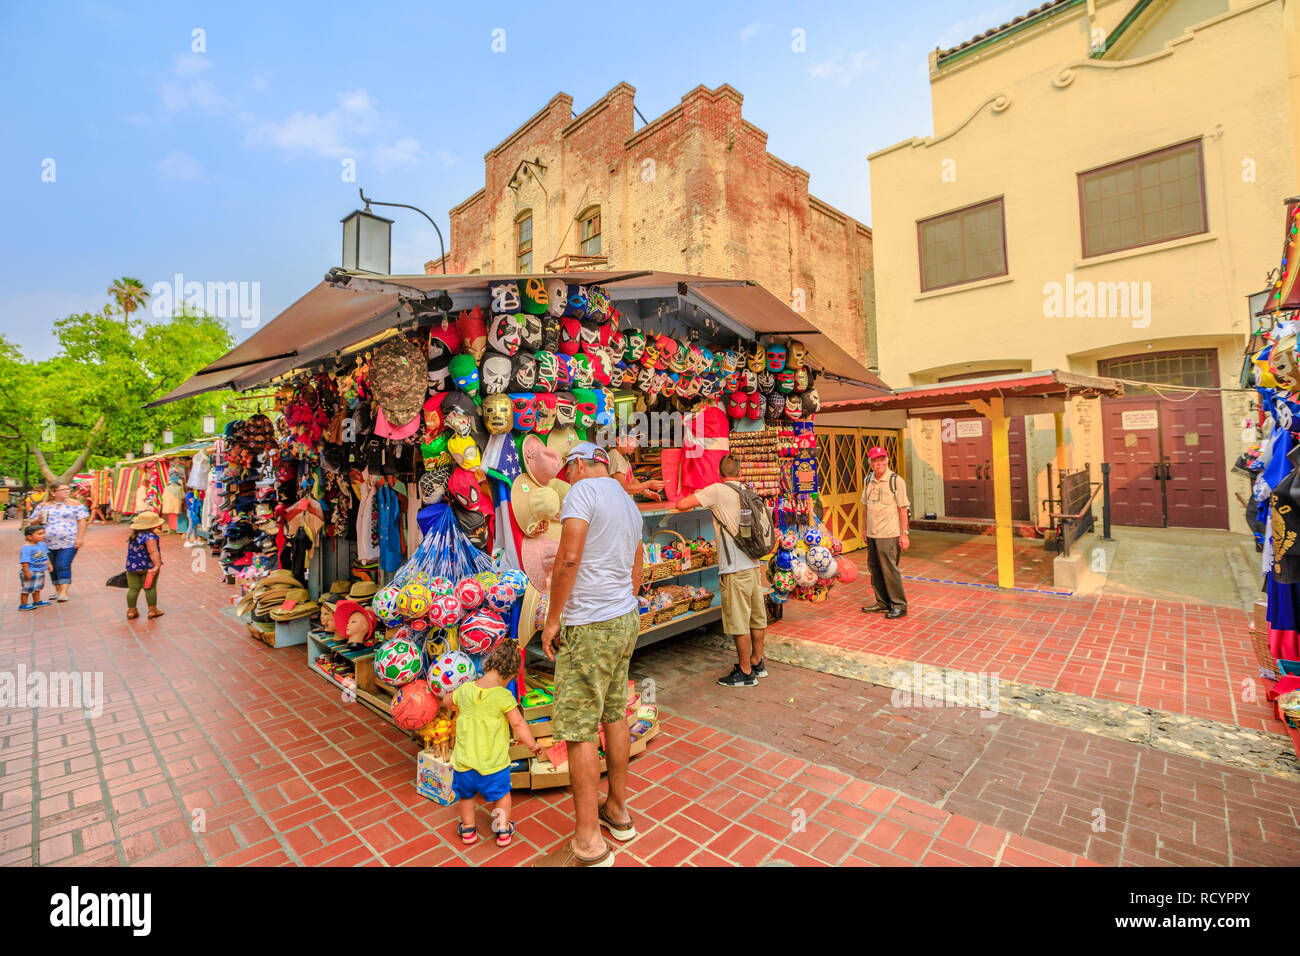 Los Angeles, California, United States - August 9, 2018: tourists shopping in Olvera Street, the oldest part of downtown LA, at El Pueblo in Los Angeles State Historic Landmark since 1953. Stock Photo